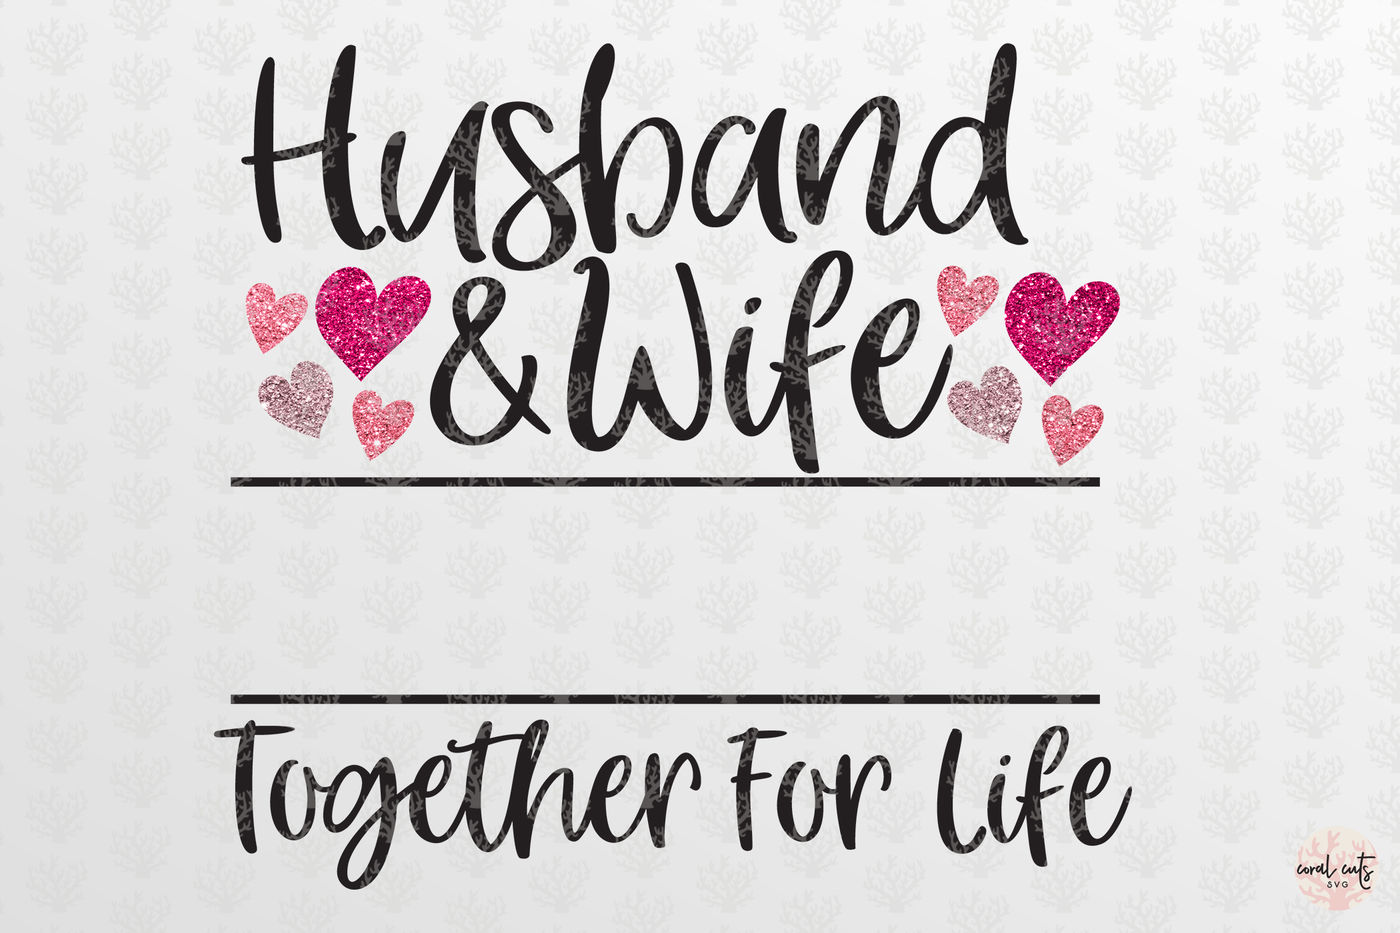 Download Husband & WIfe Together For Life - Wedding & Anniversary ...